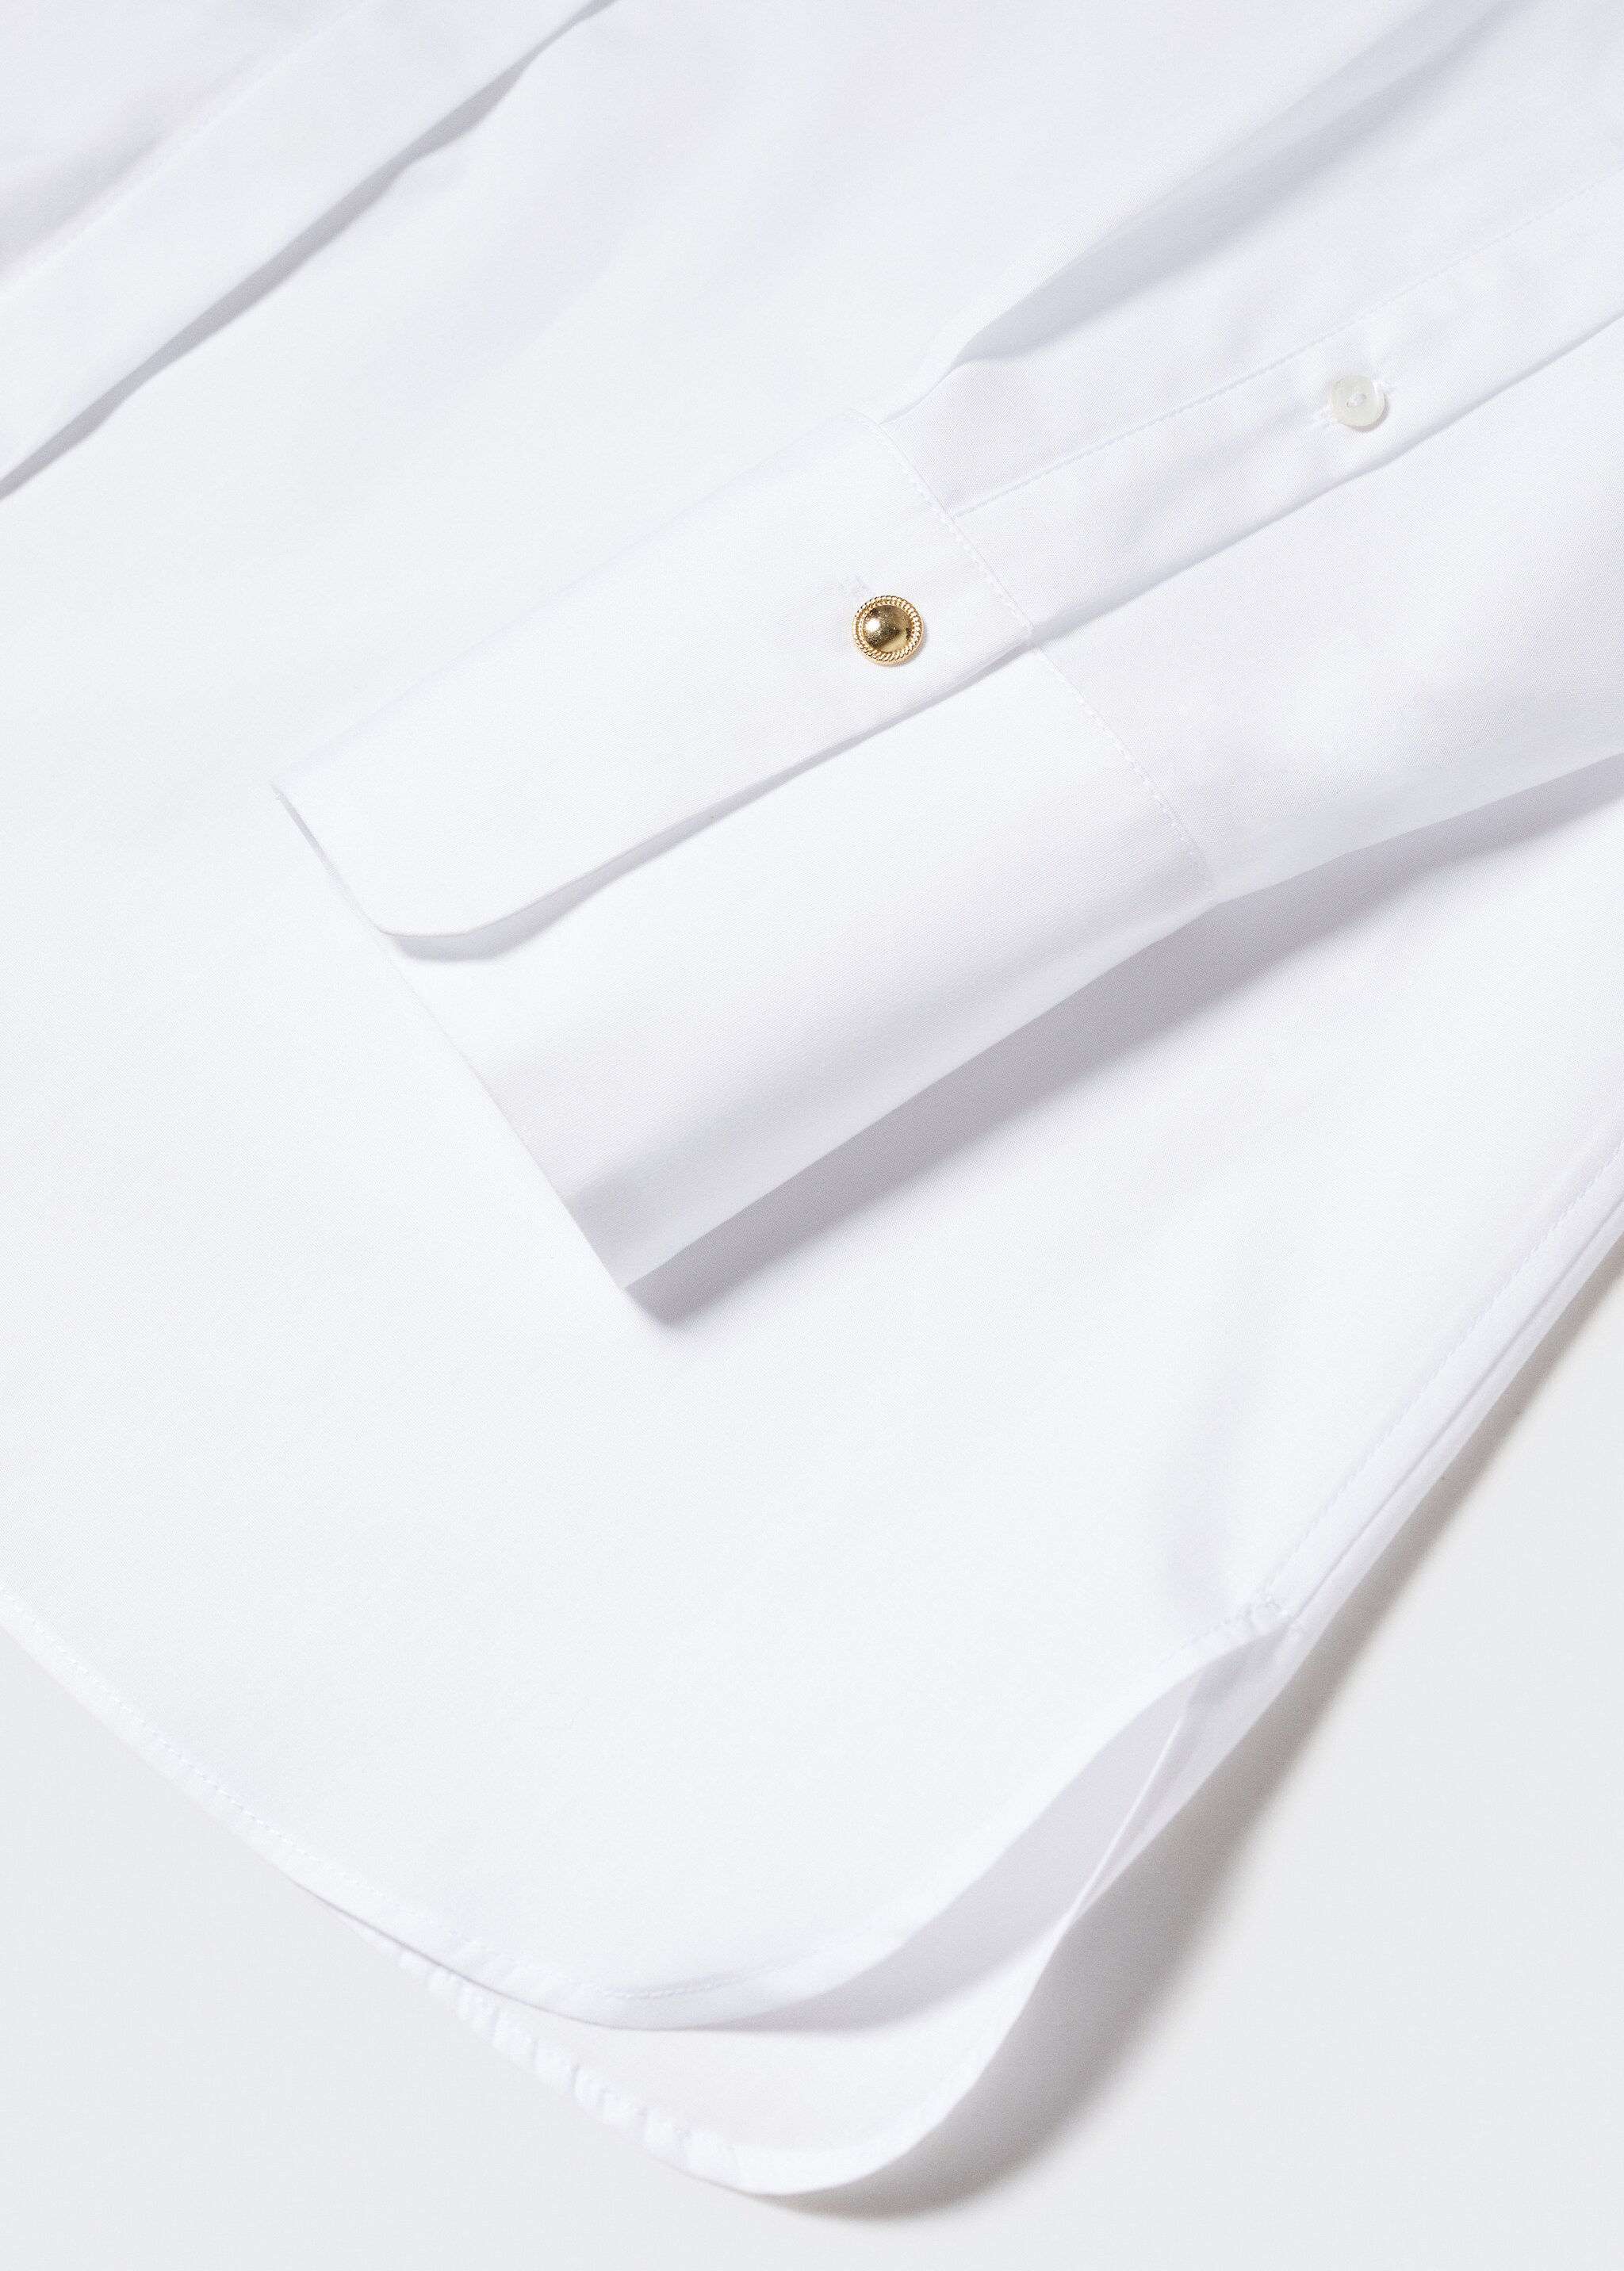 Oversize cotton shirt - Details of the article 8